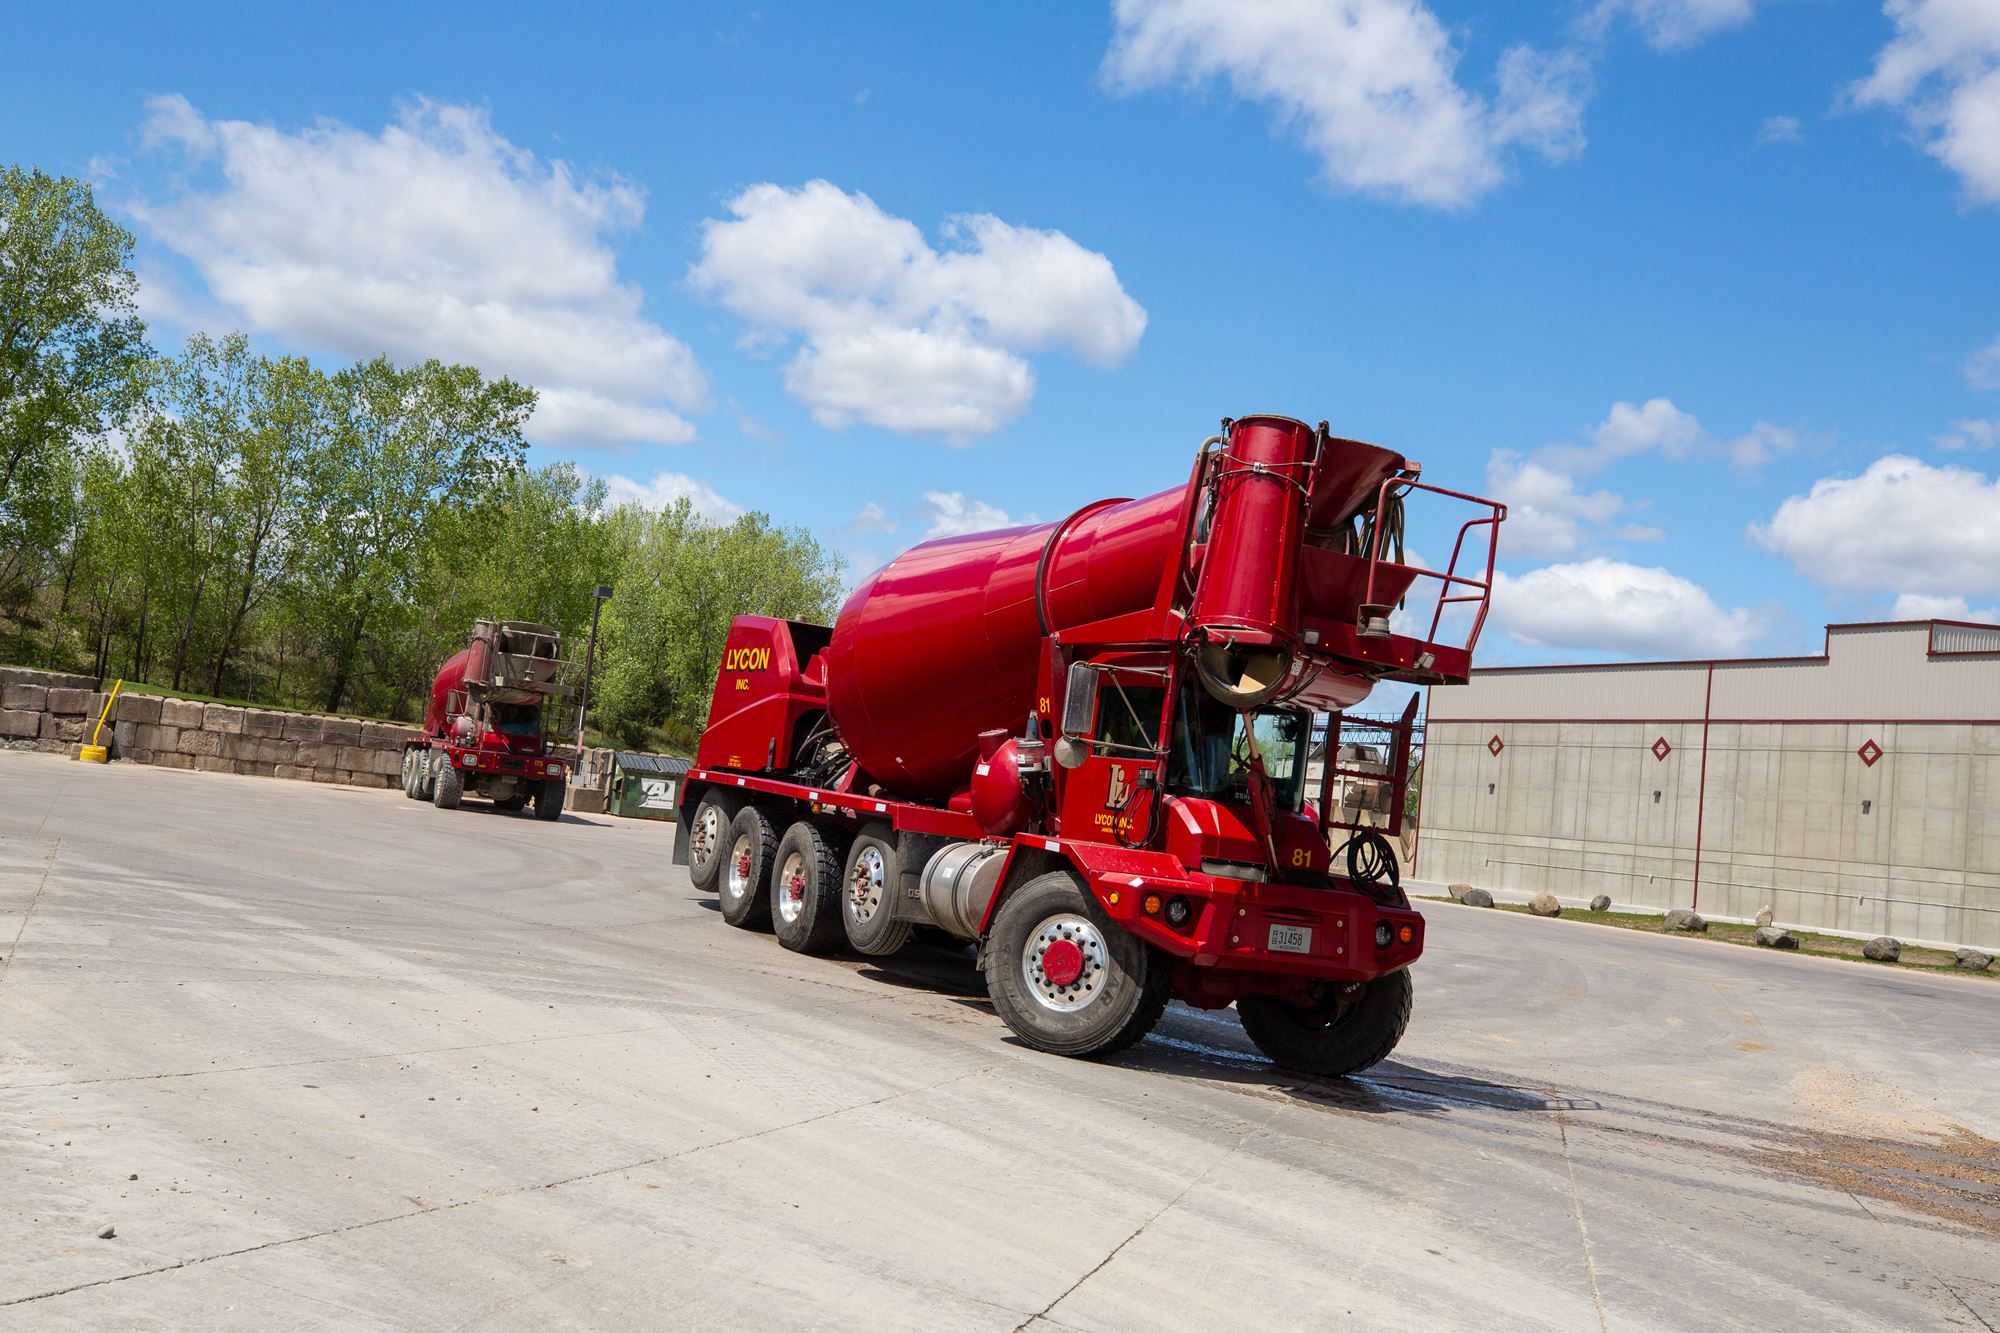 Red Oshkosh S-Series front discharge mixer showing off its turning radius outdoors on a sunny day